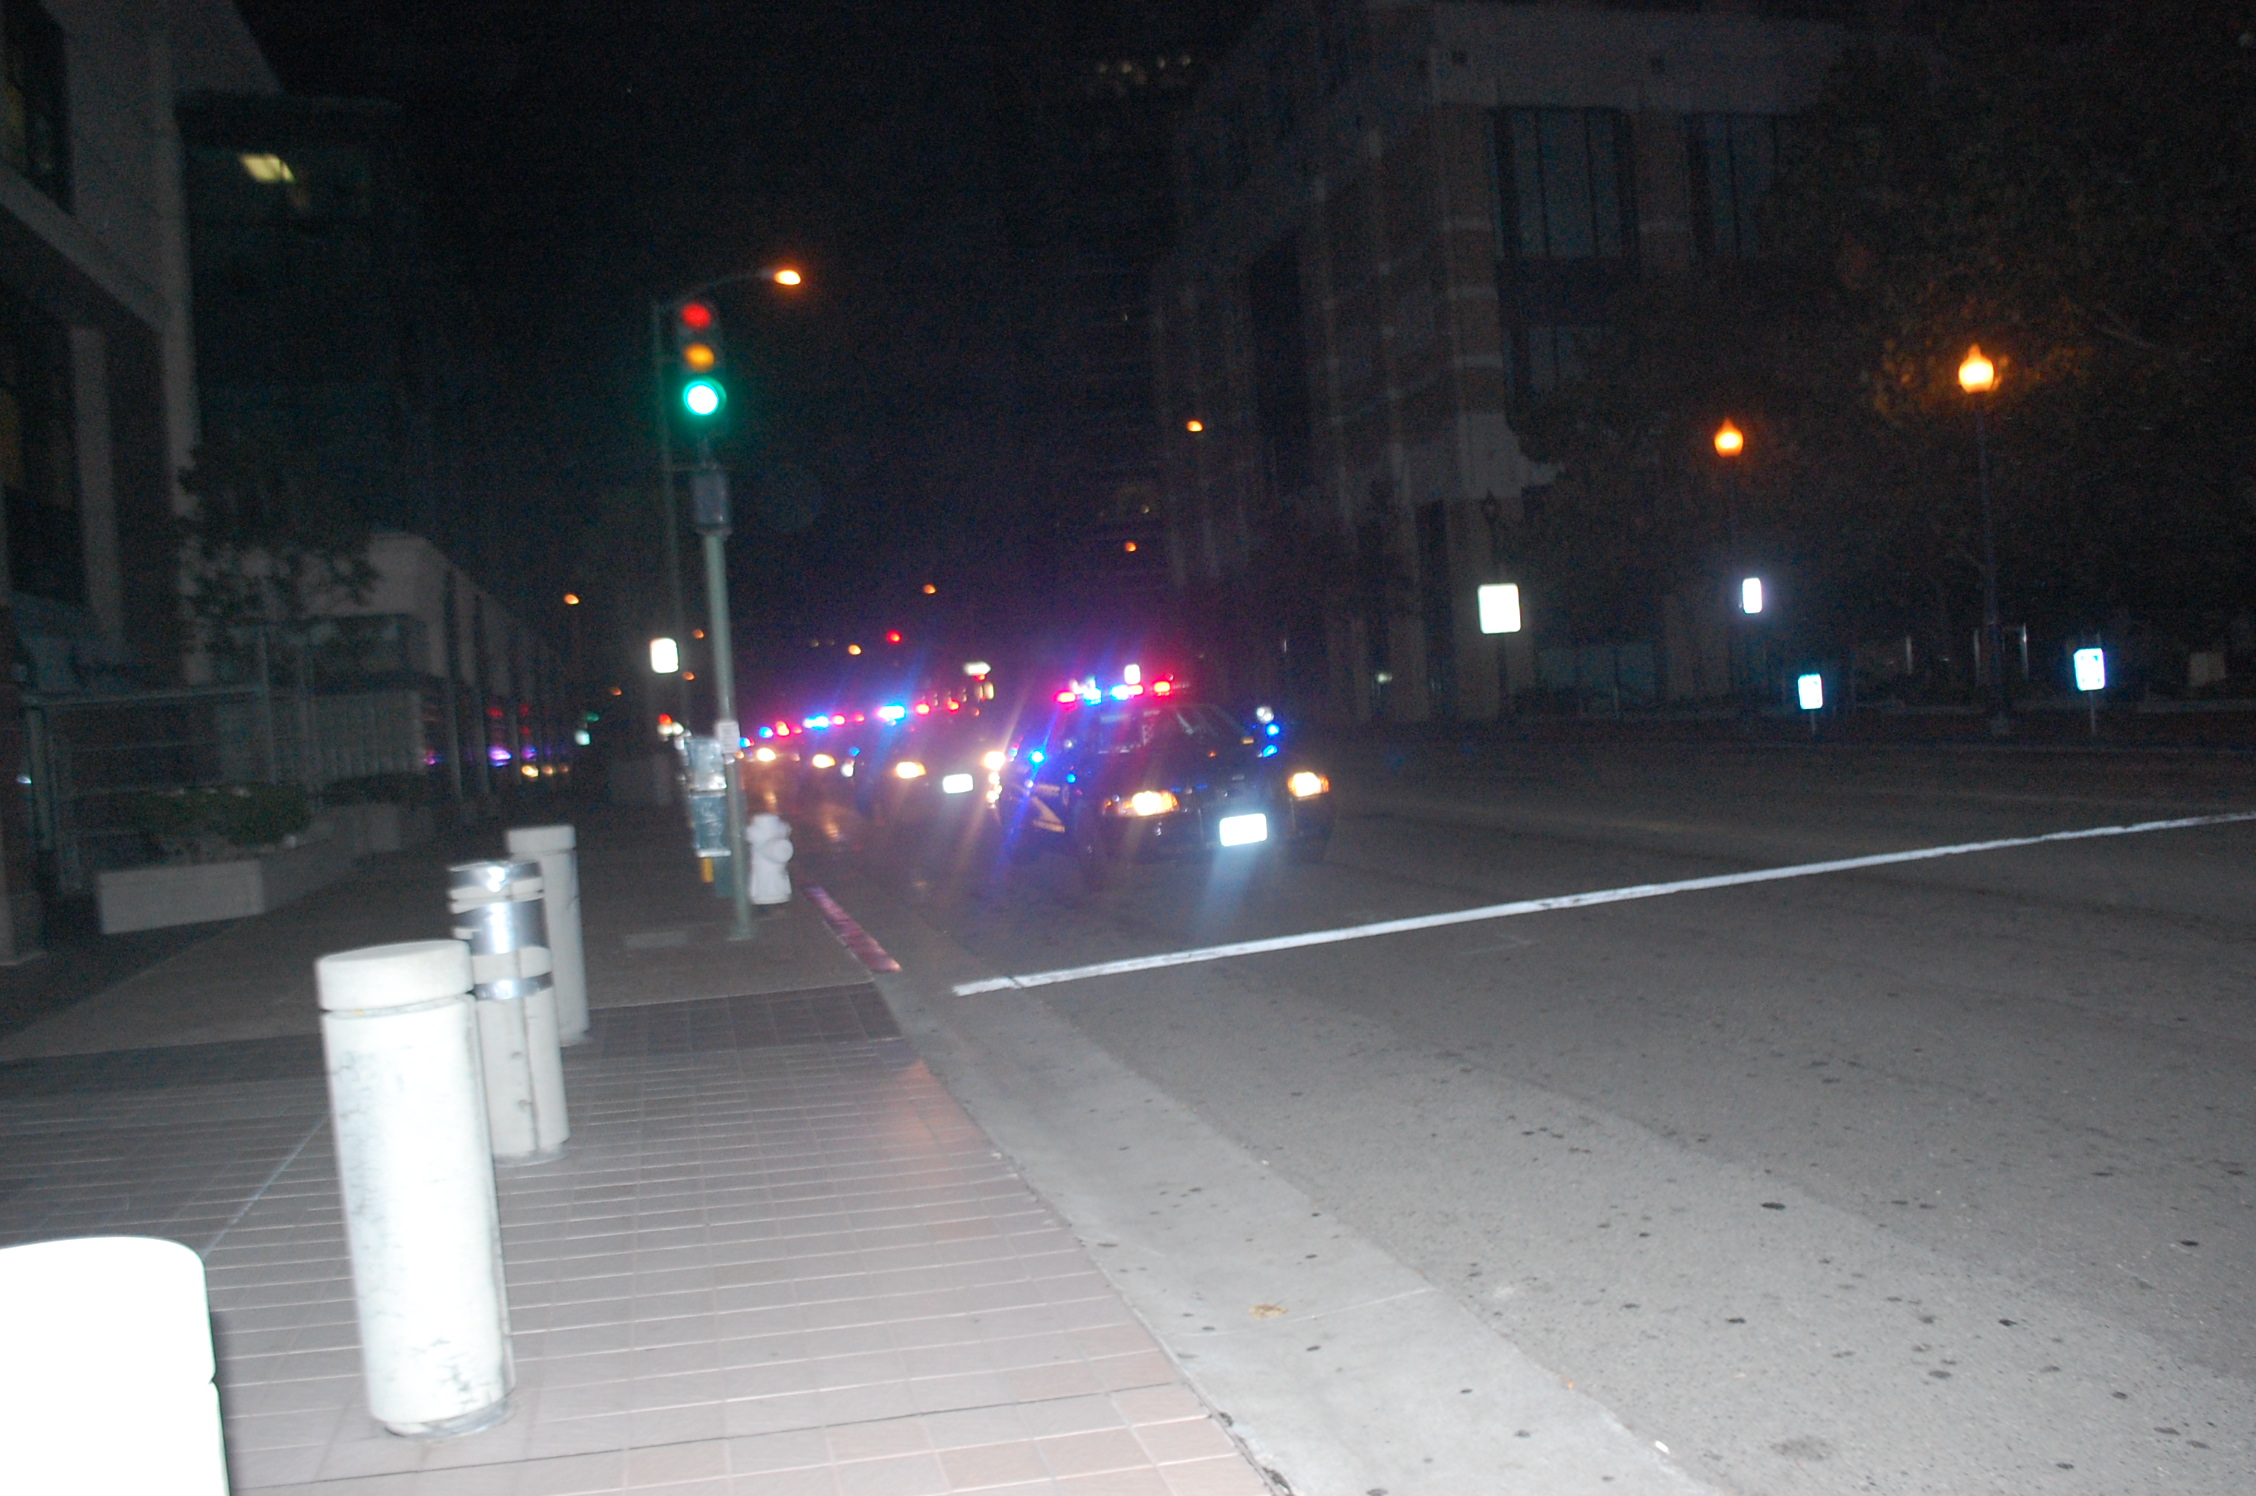 a city street at night with police cars on the street